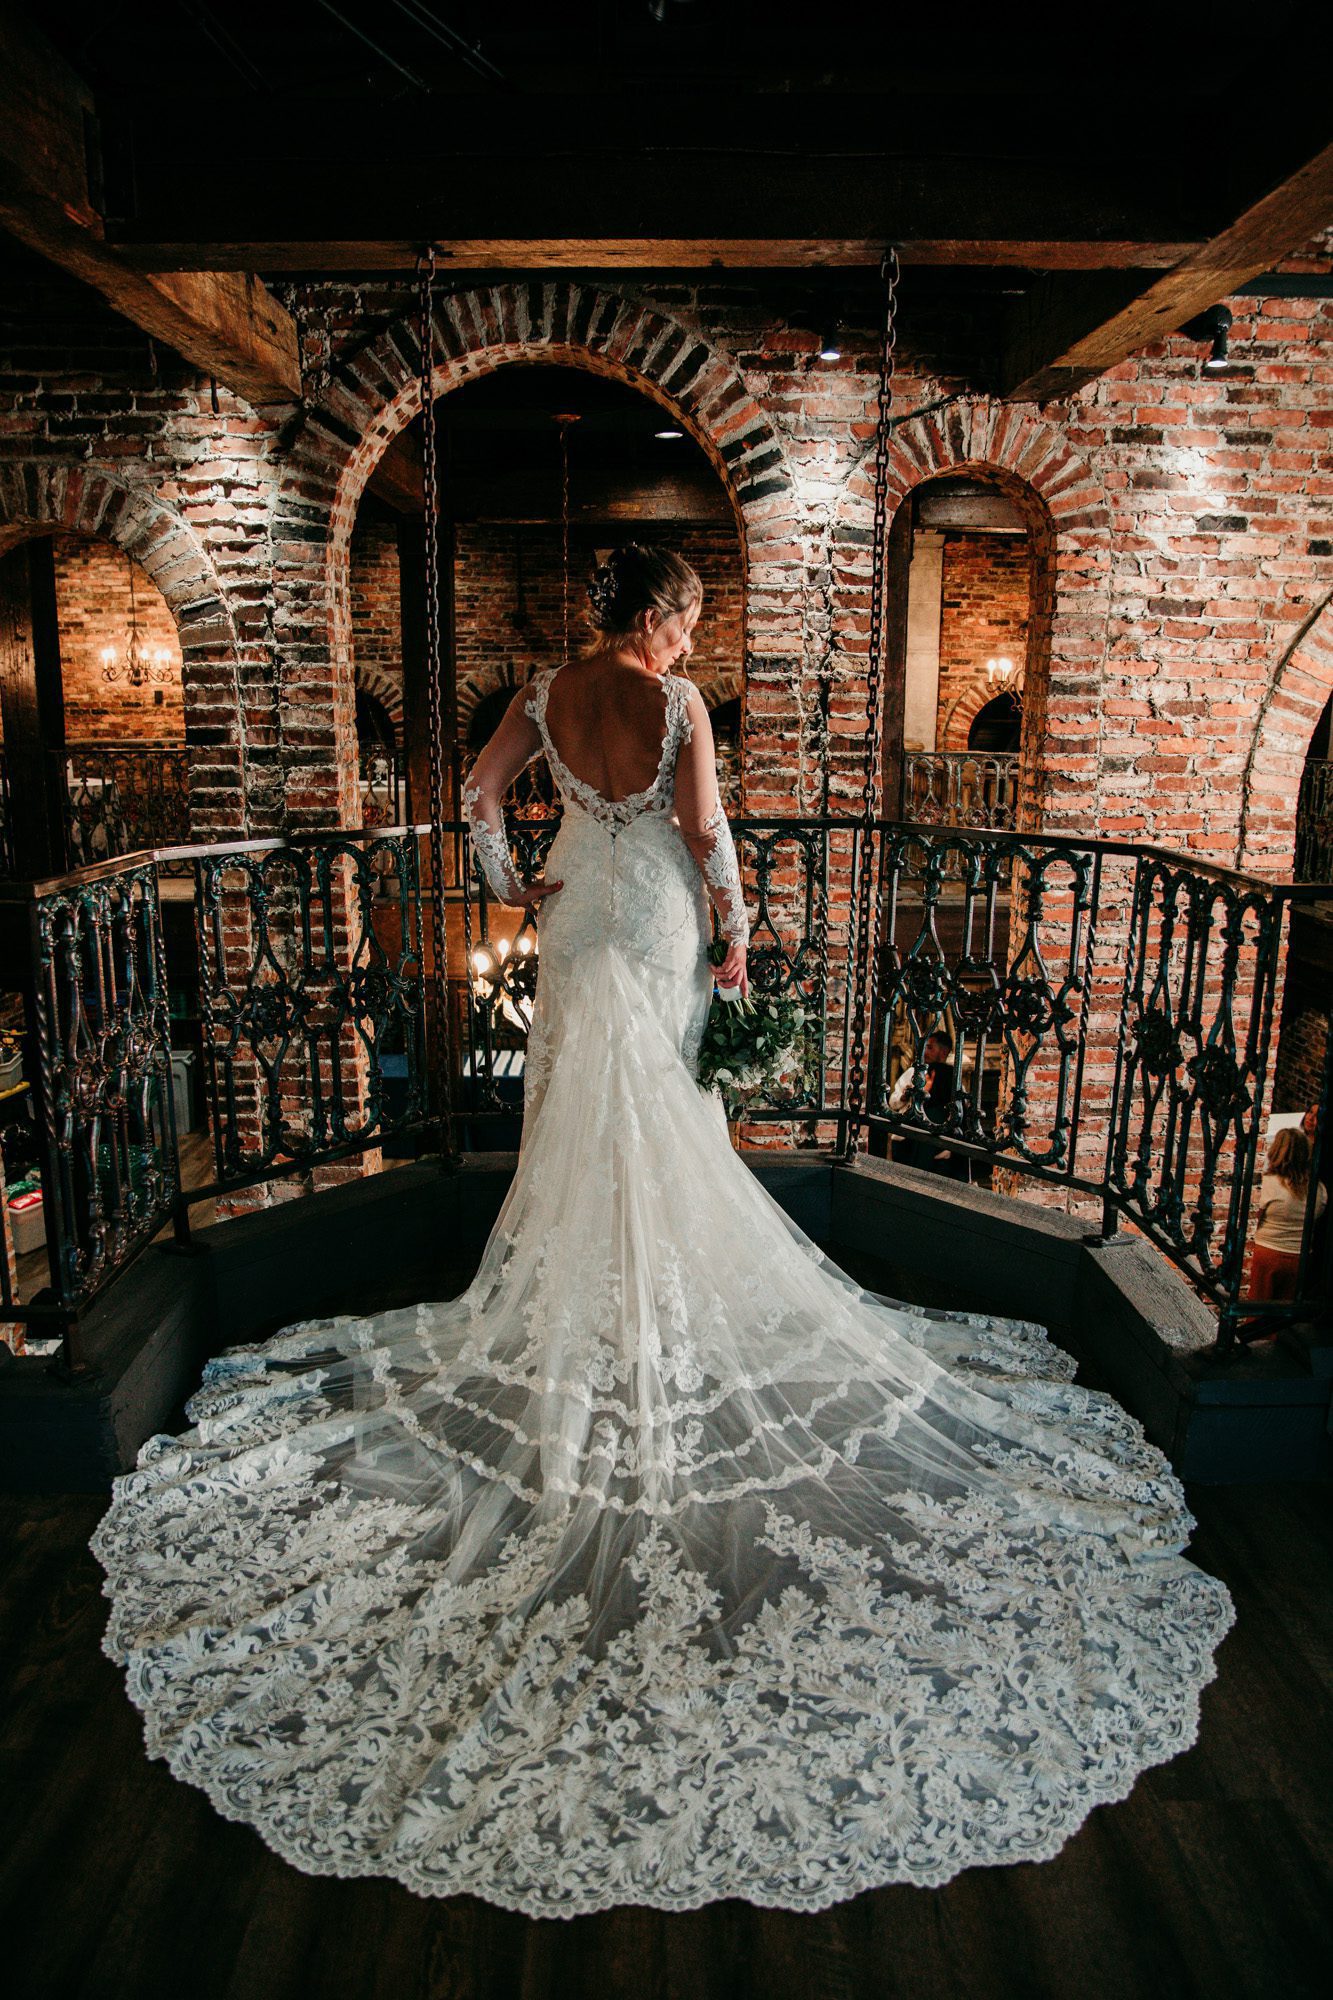 Bride inside a vintage brick building old world charm at the Bedford event and wedding venue in Nashville TN. Photo by Krista Lee Photography